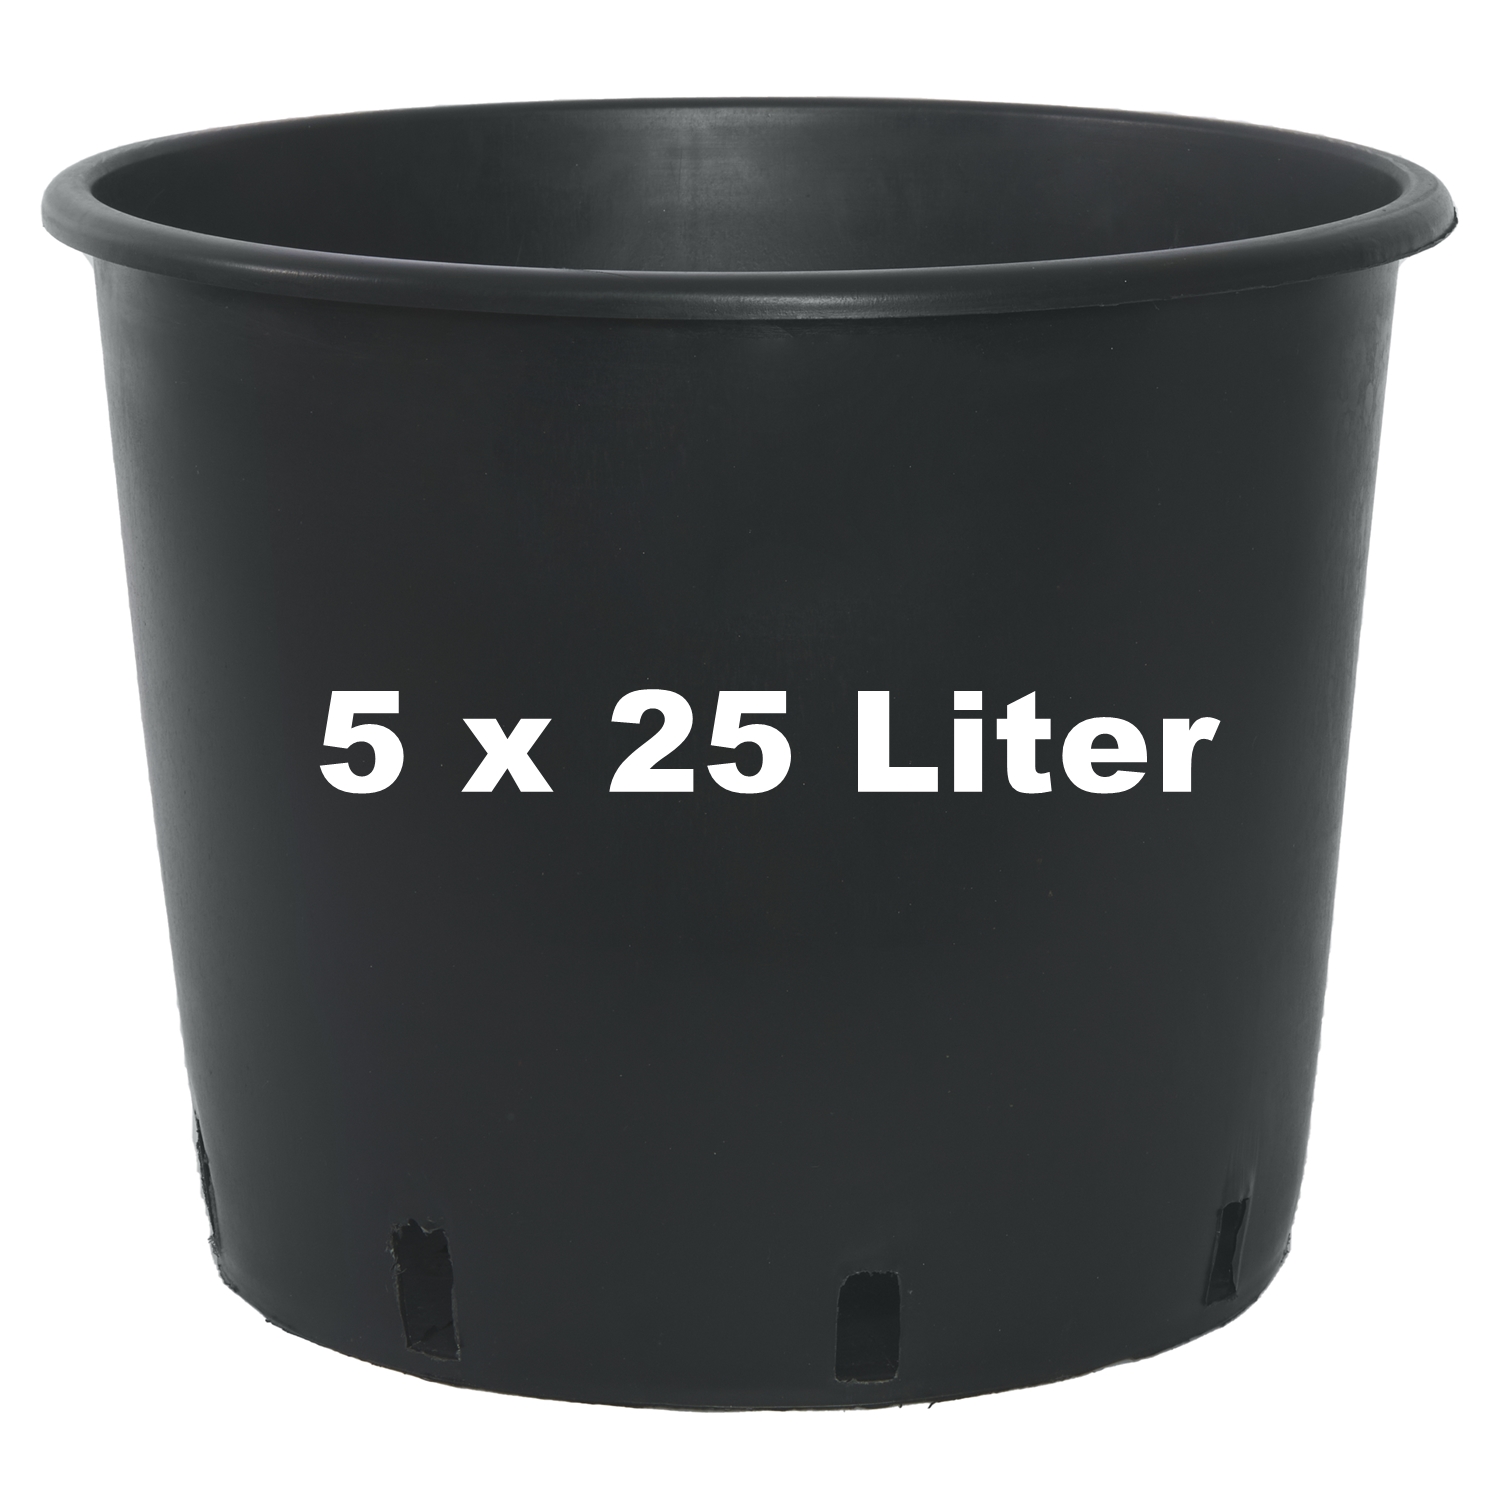 5 x Pflanzcontainer 25 Liter